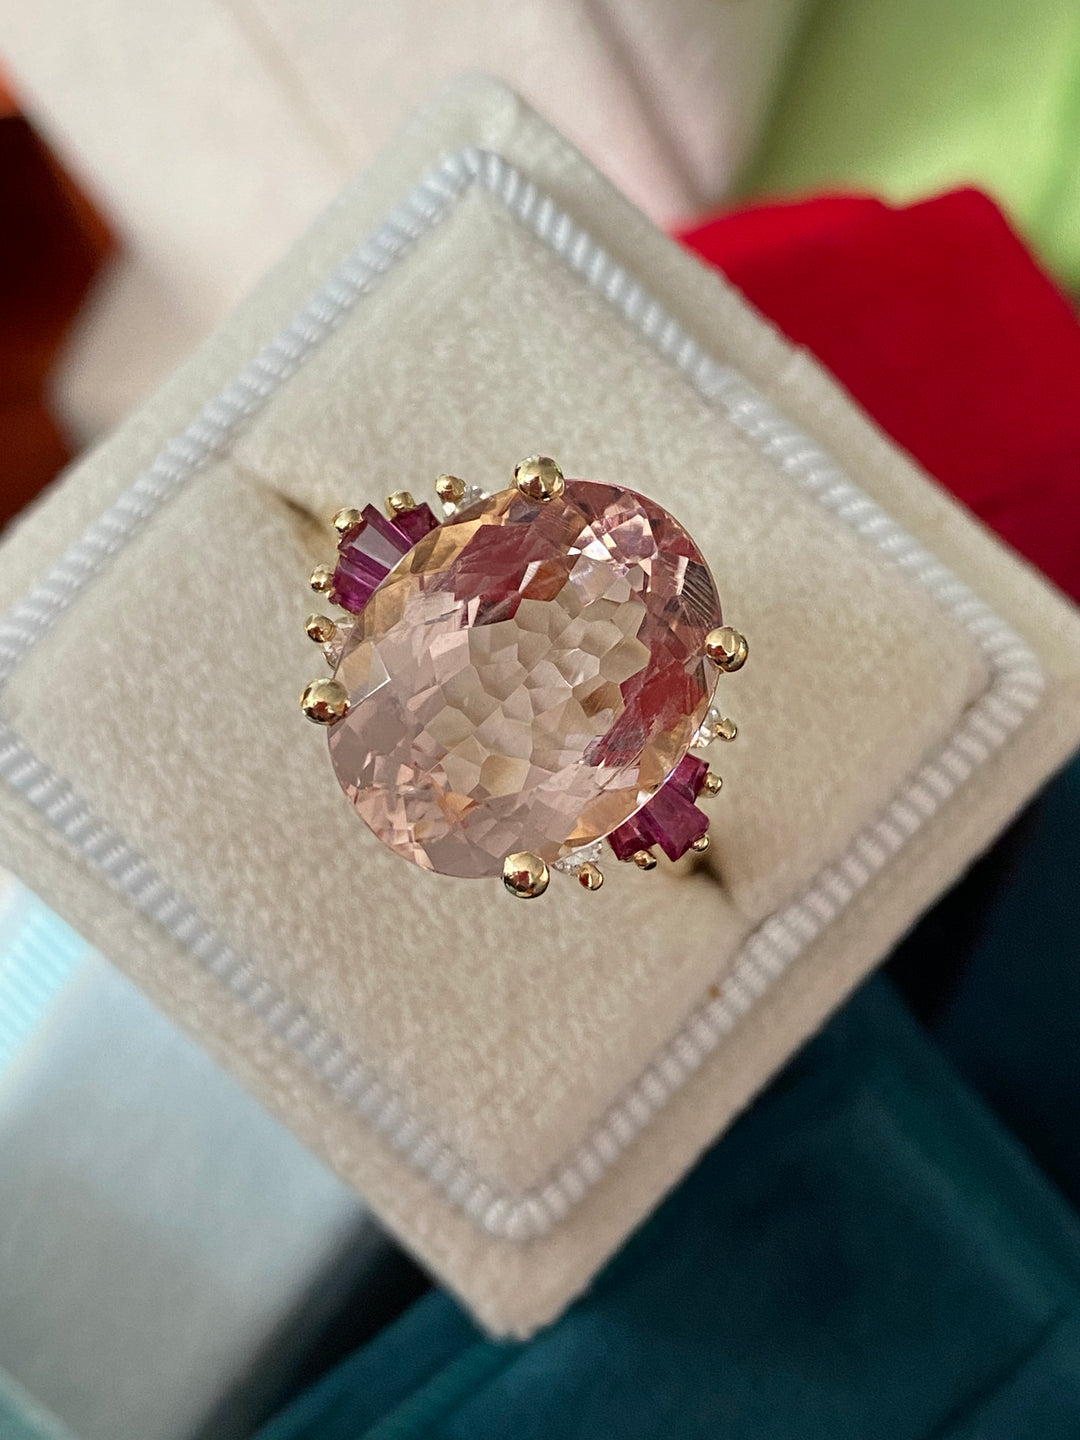 10 Carat Oval Cut Morganite Ruby and Diamond Engagement Cocktail Ring in Yellow Gold  Katherine James Jewellery